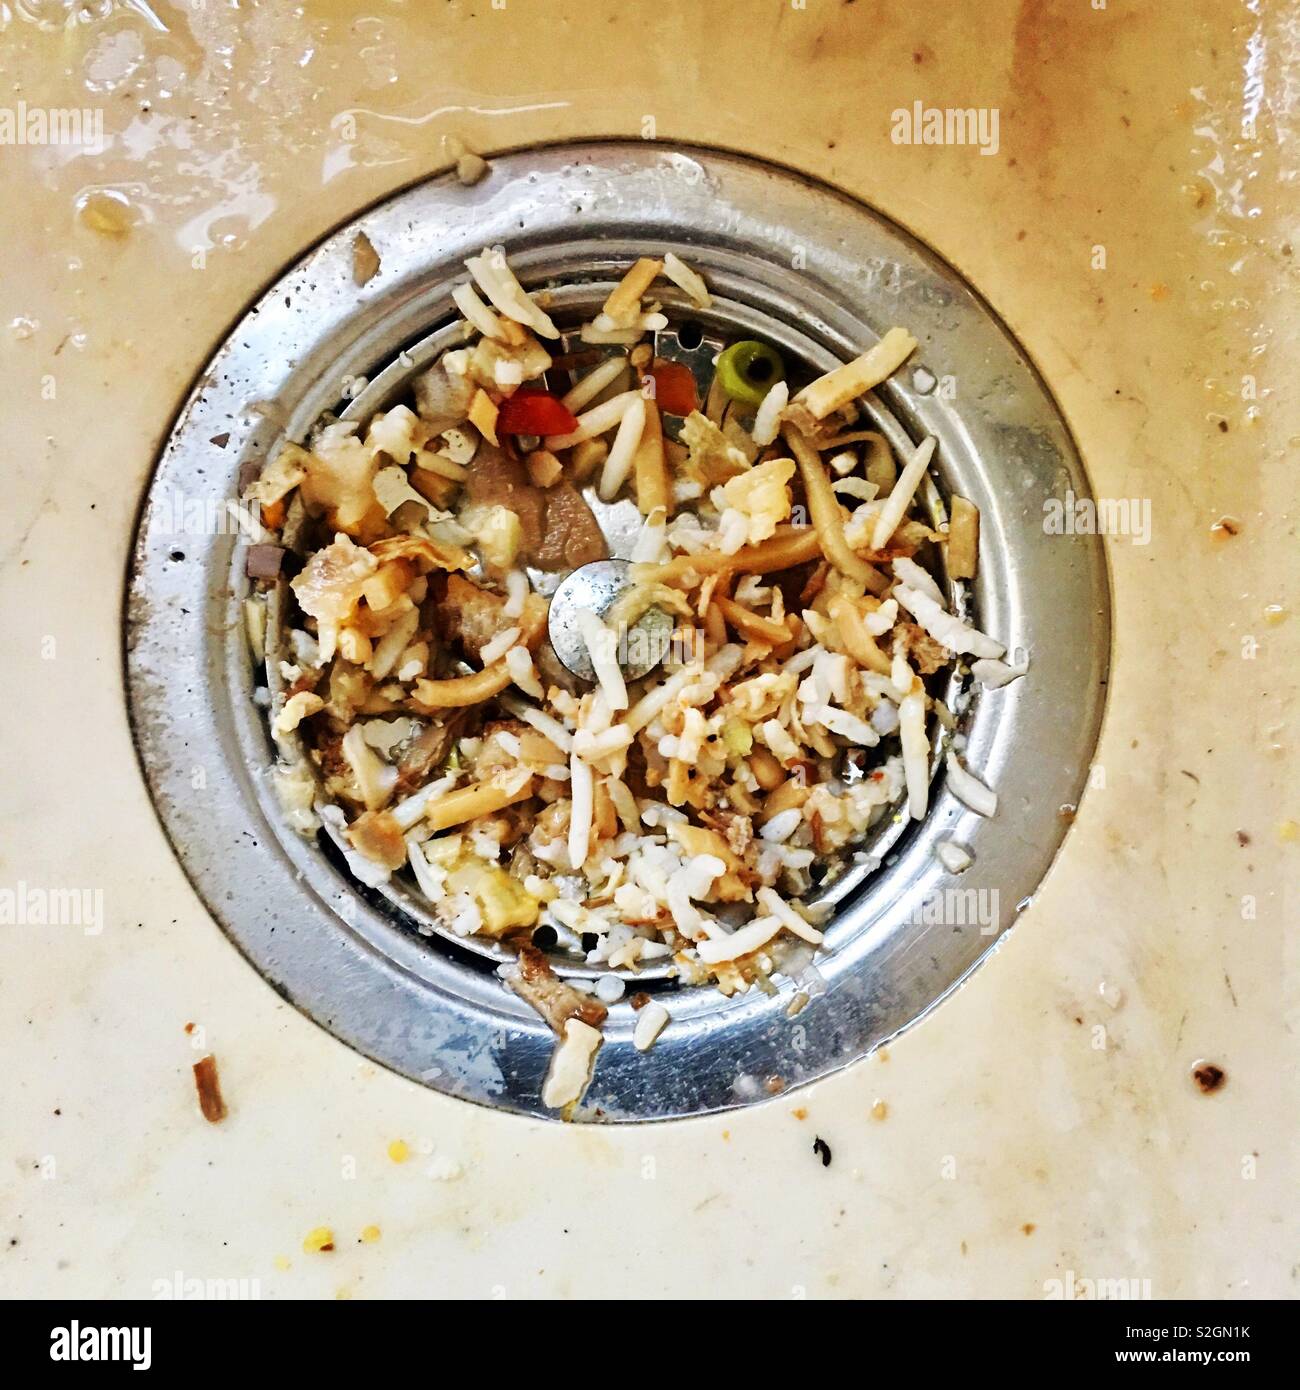 Collected food waste in sink plug Stock Photo - Alamy